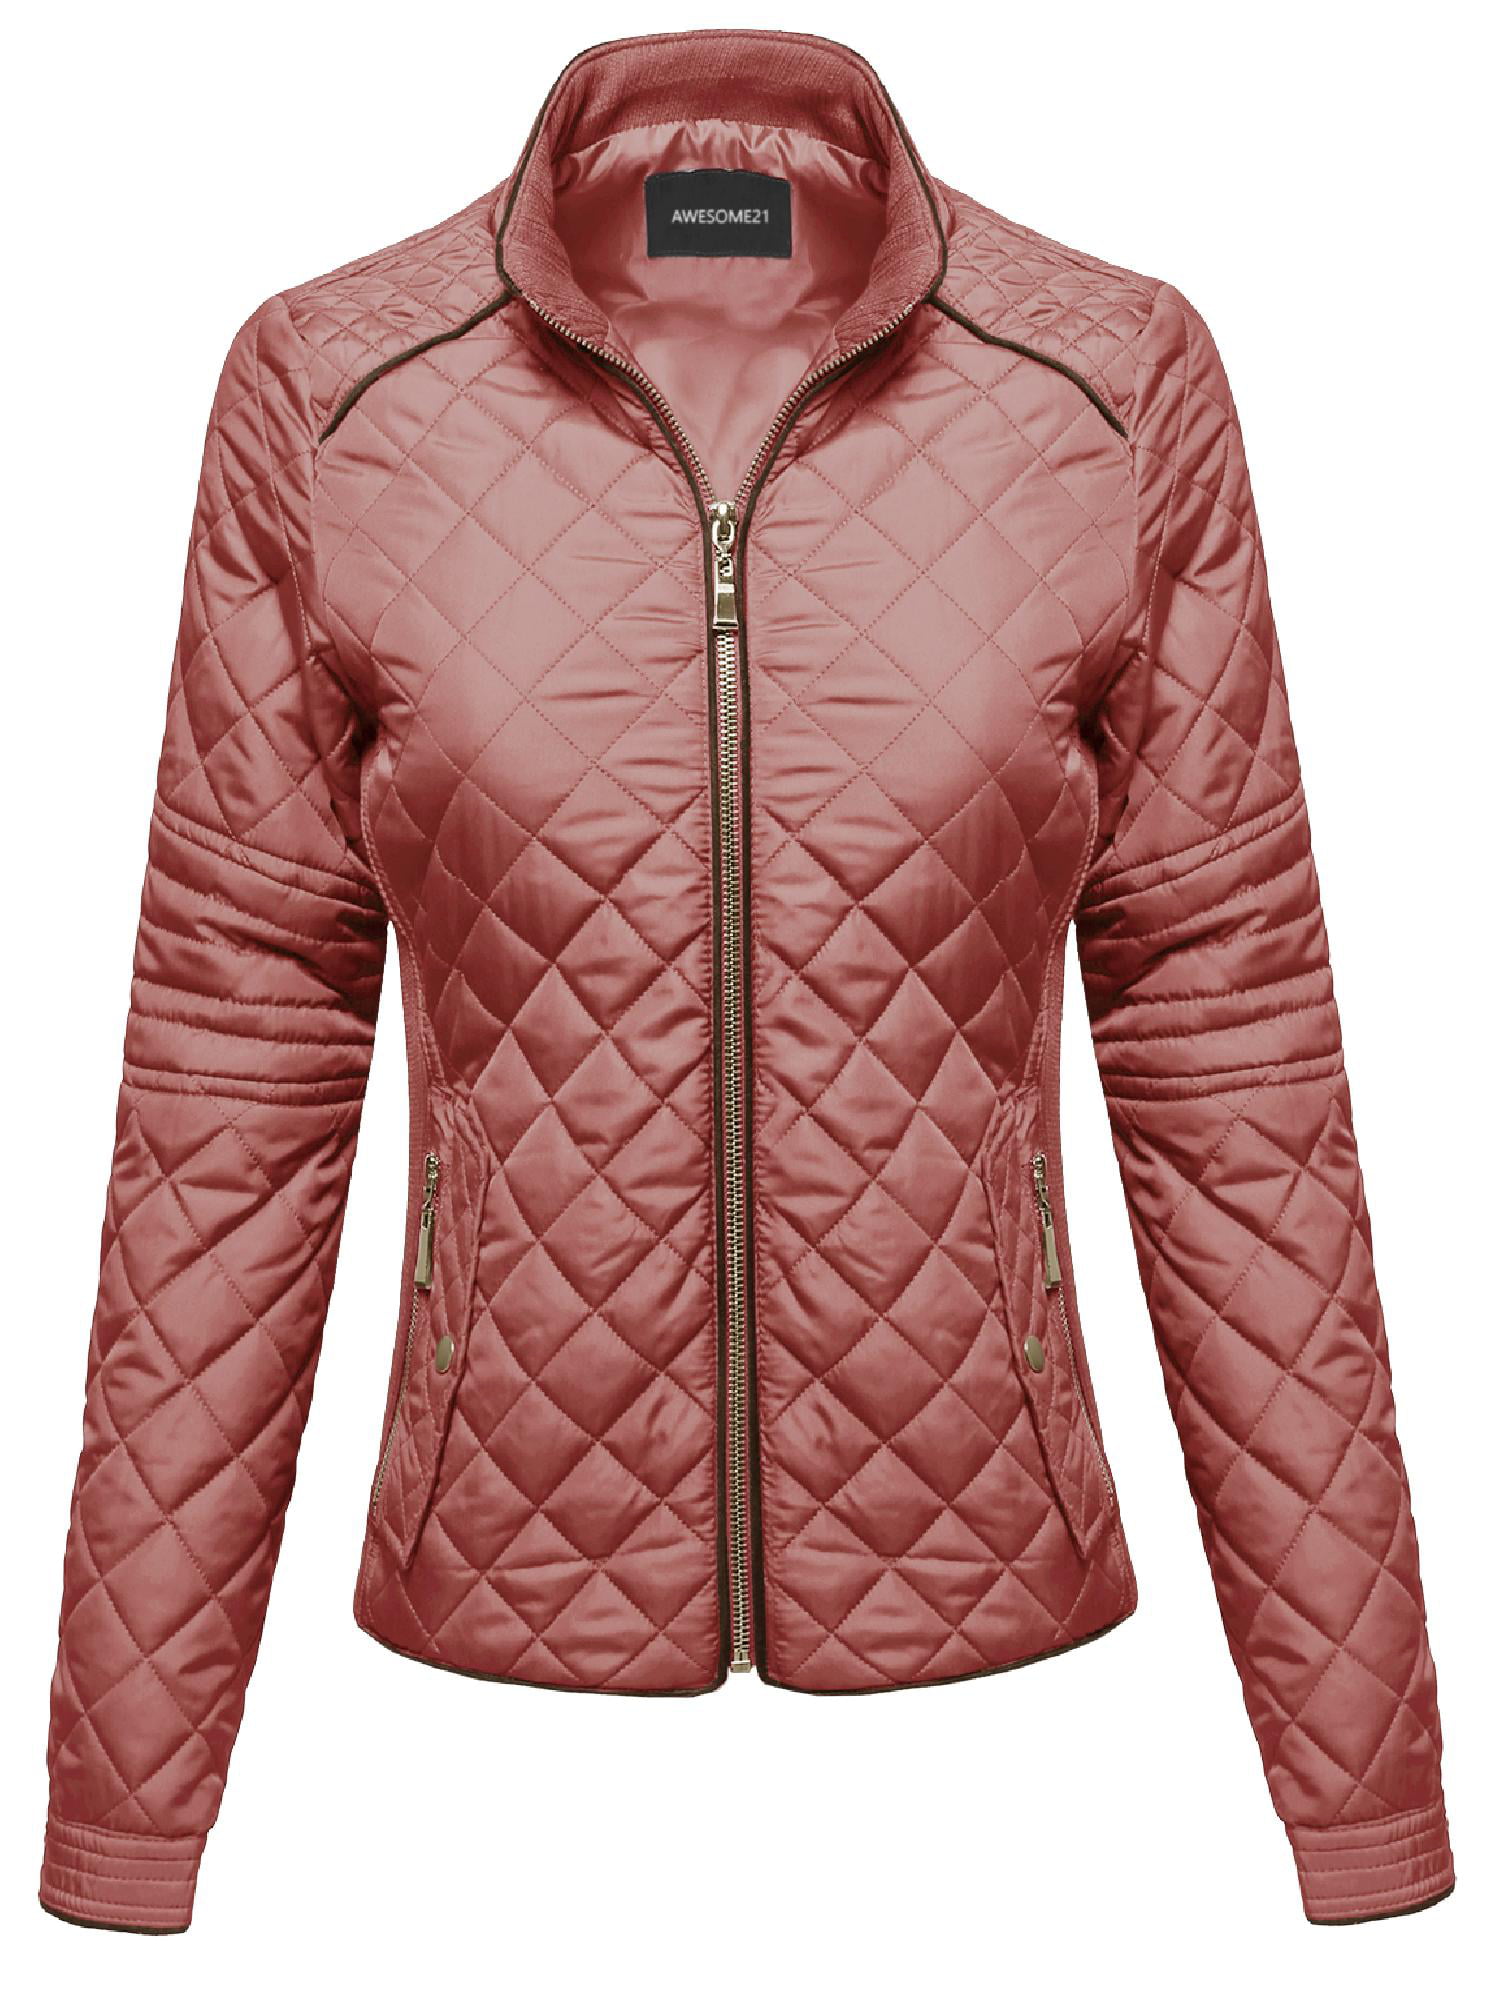 FashionOutfit Women's Quilted Puffer Jacket With Fleece Lining